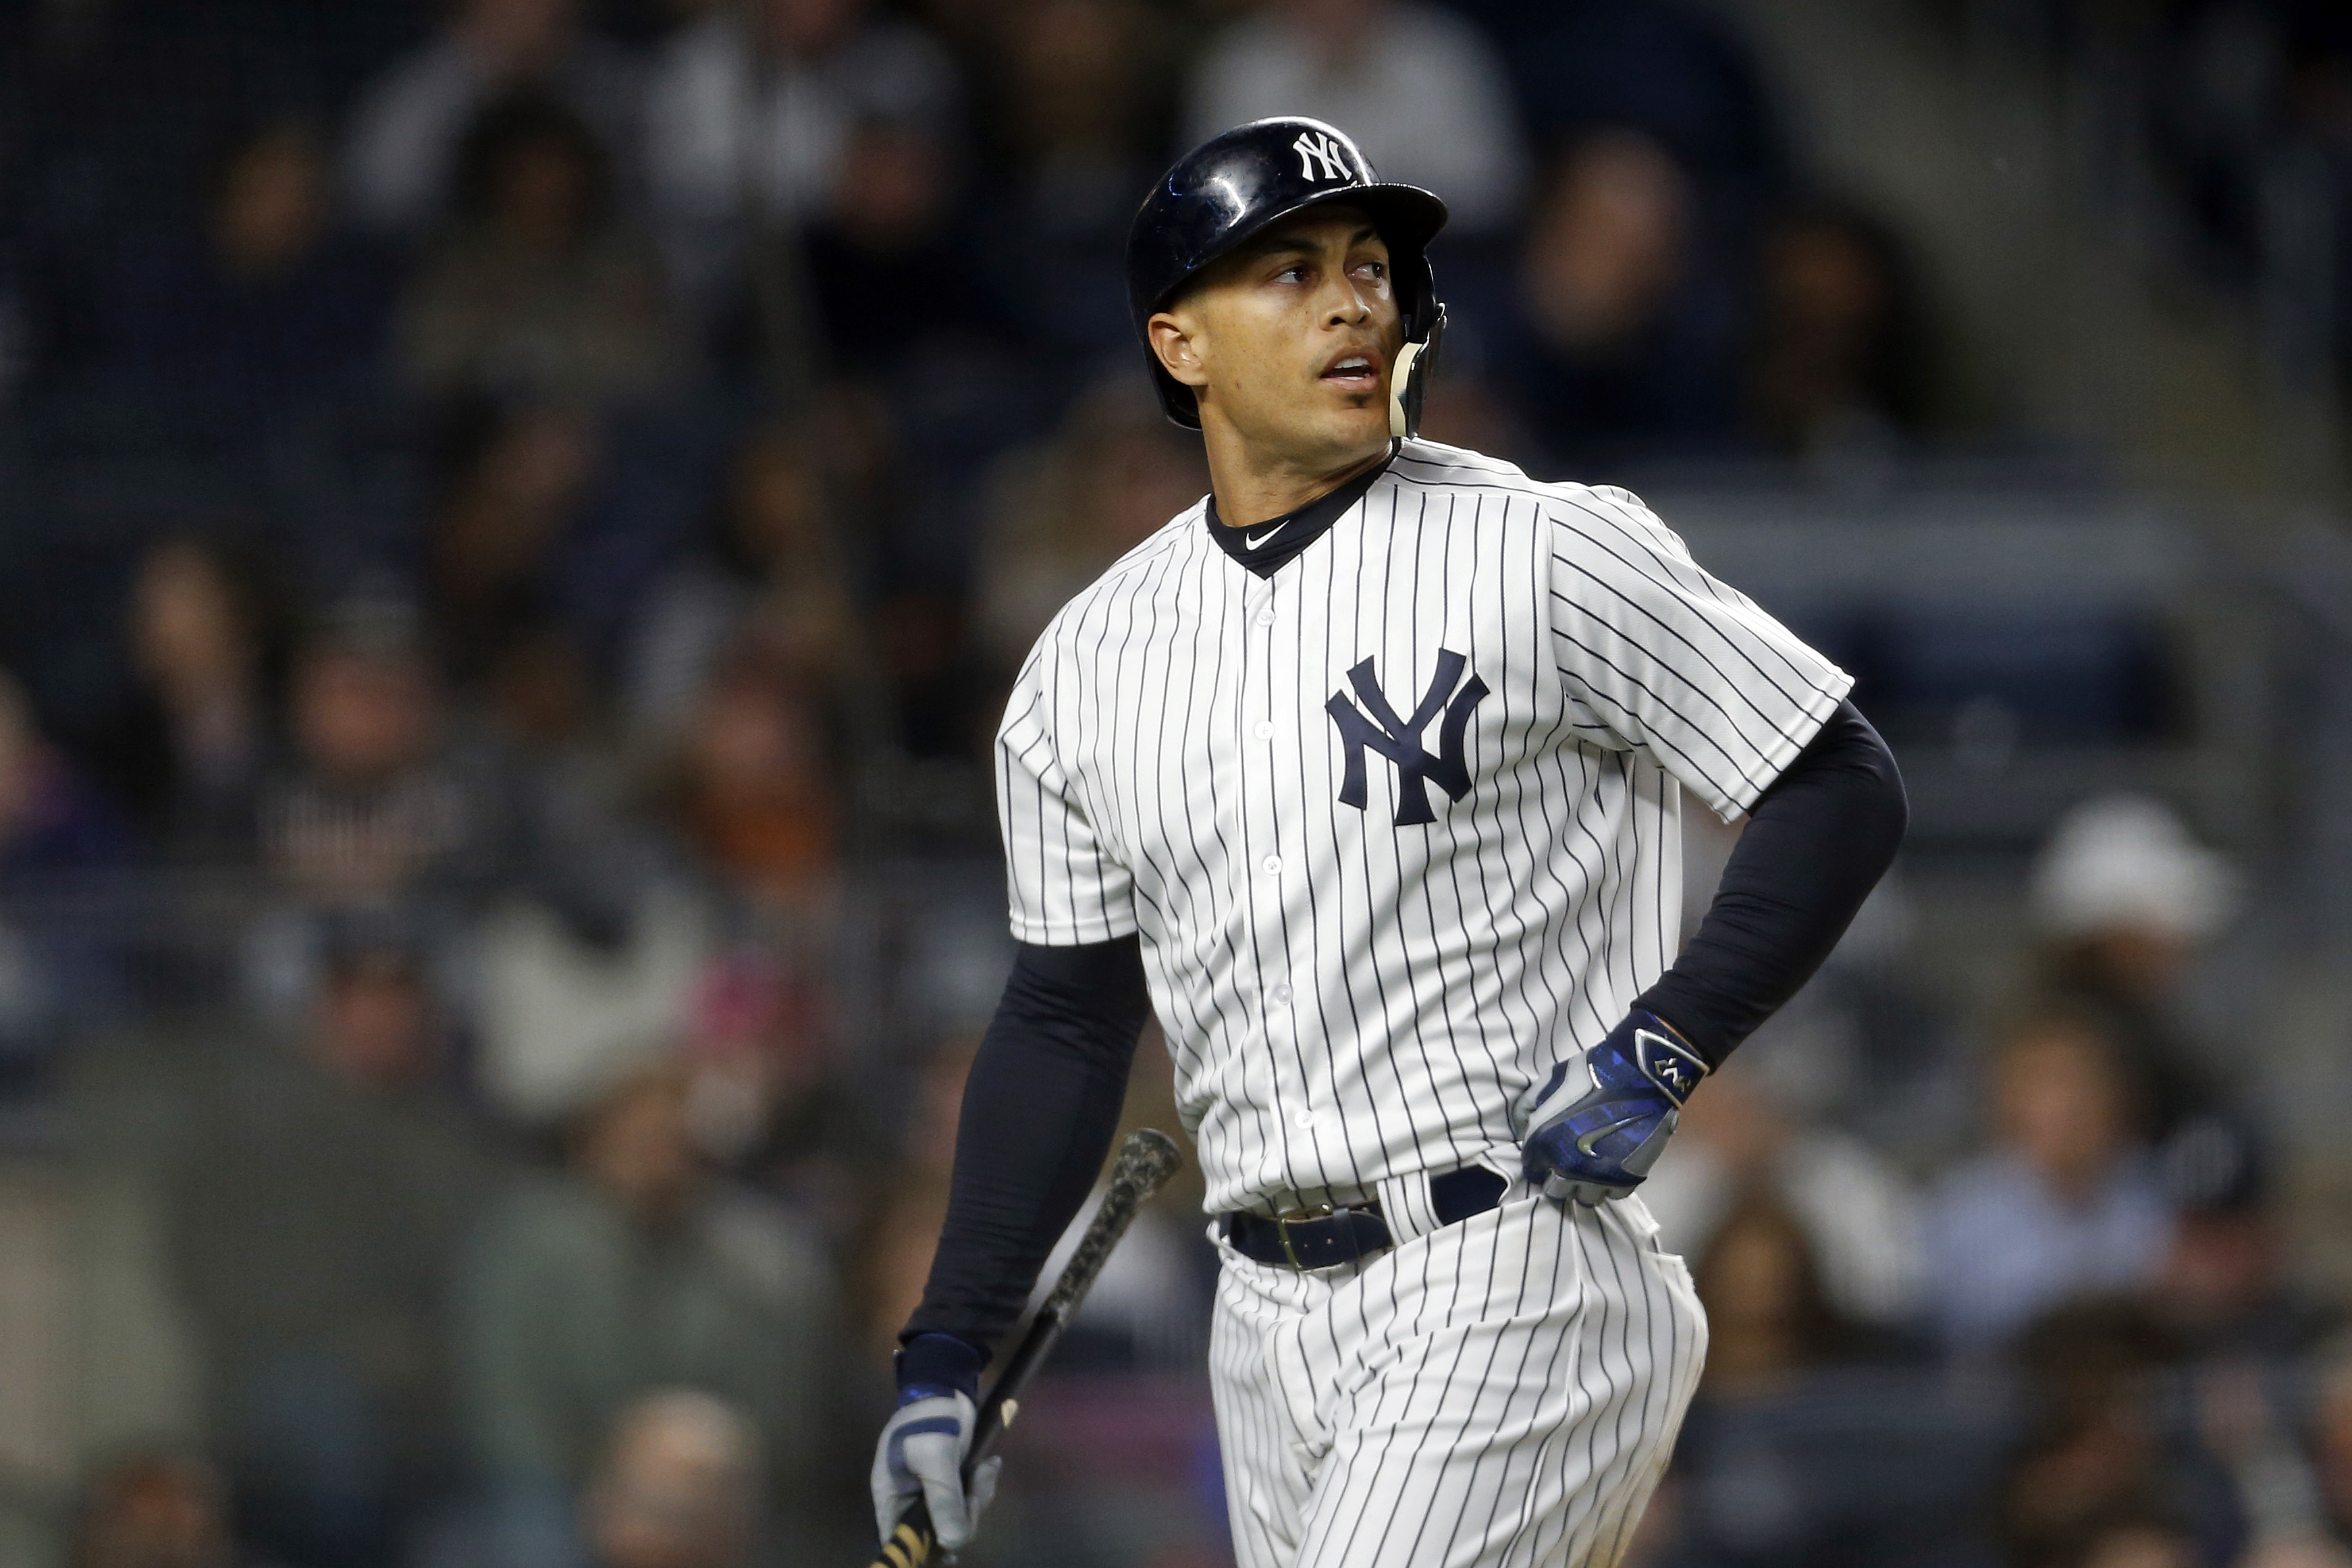 Giancarlo Stanton #27 of the New York Yankees at bat against the Baltimore Orioles during the third inning at Yankee Stadium on April 6, 2018 in the Bronx borough of New York City. (Photo by Adam Hunger/Getty Images)